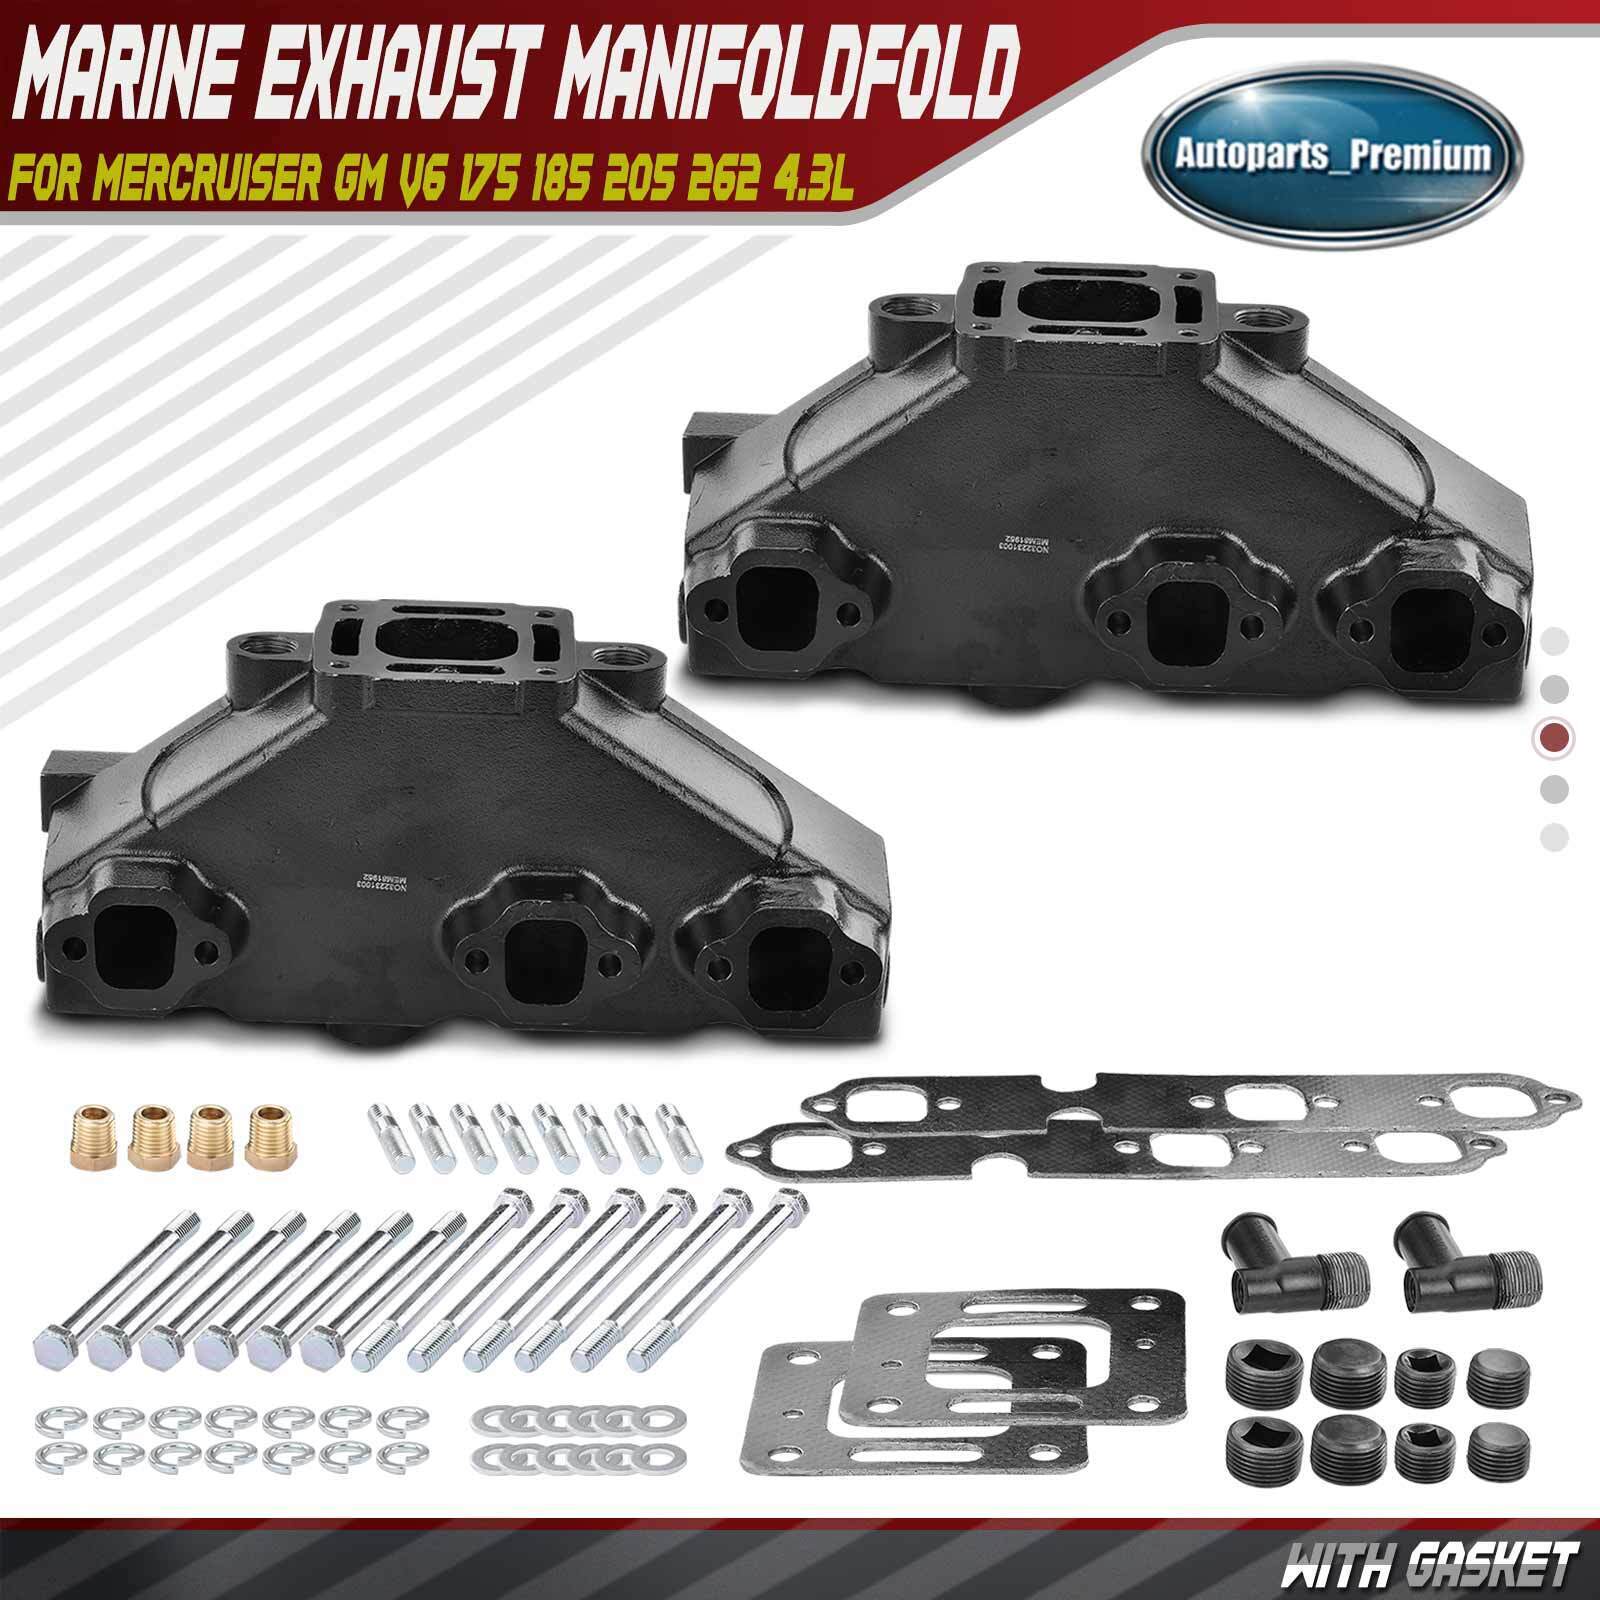 2x Marine Exhaust Manifold with Gasket for MerCruiser GM V6 175 185 205 262 4.3L